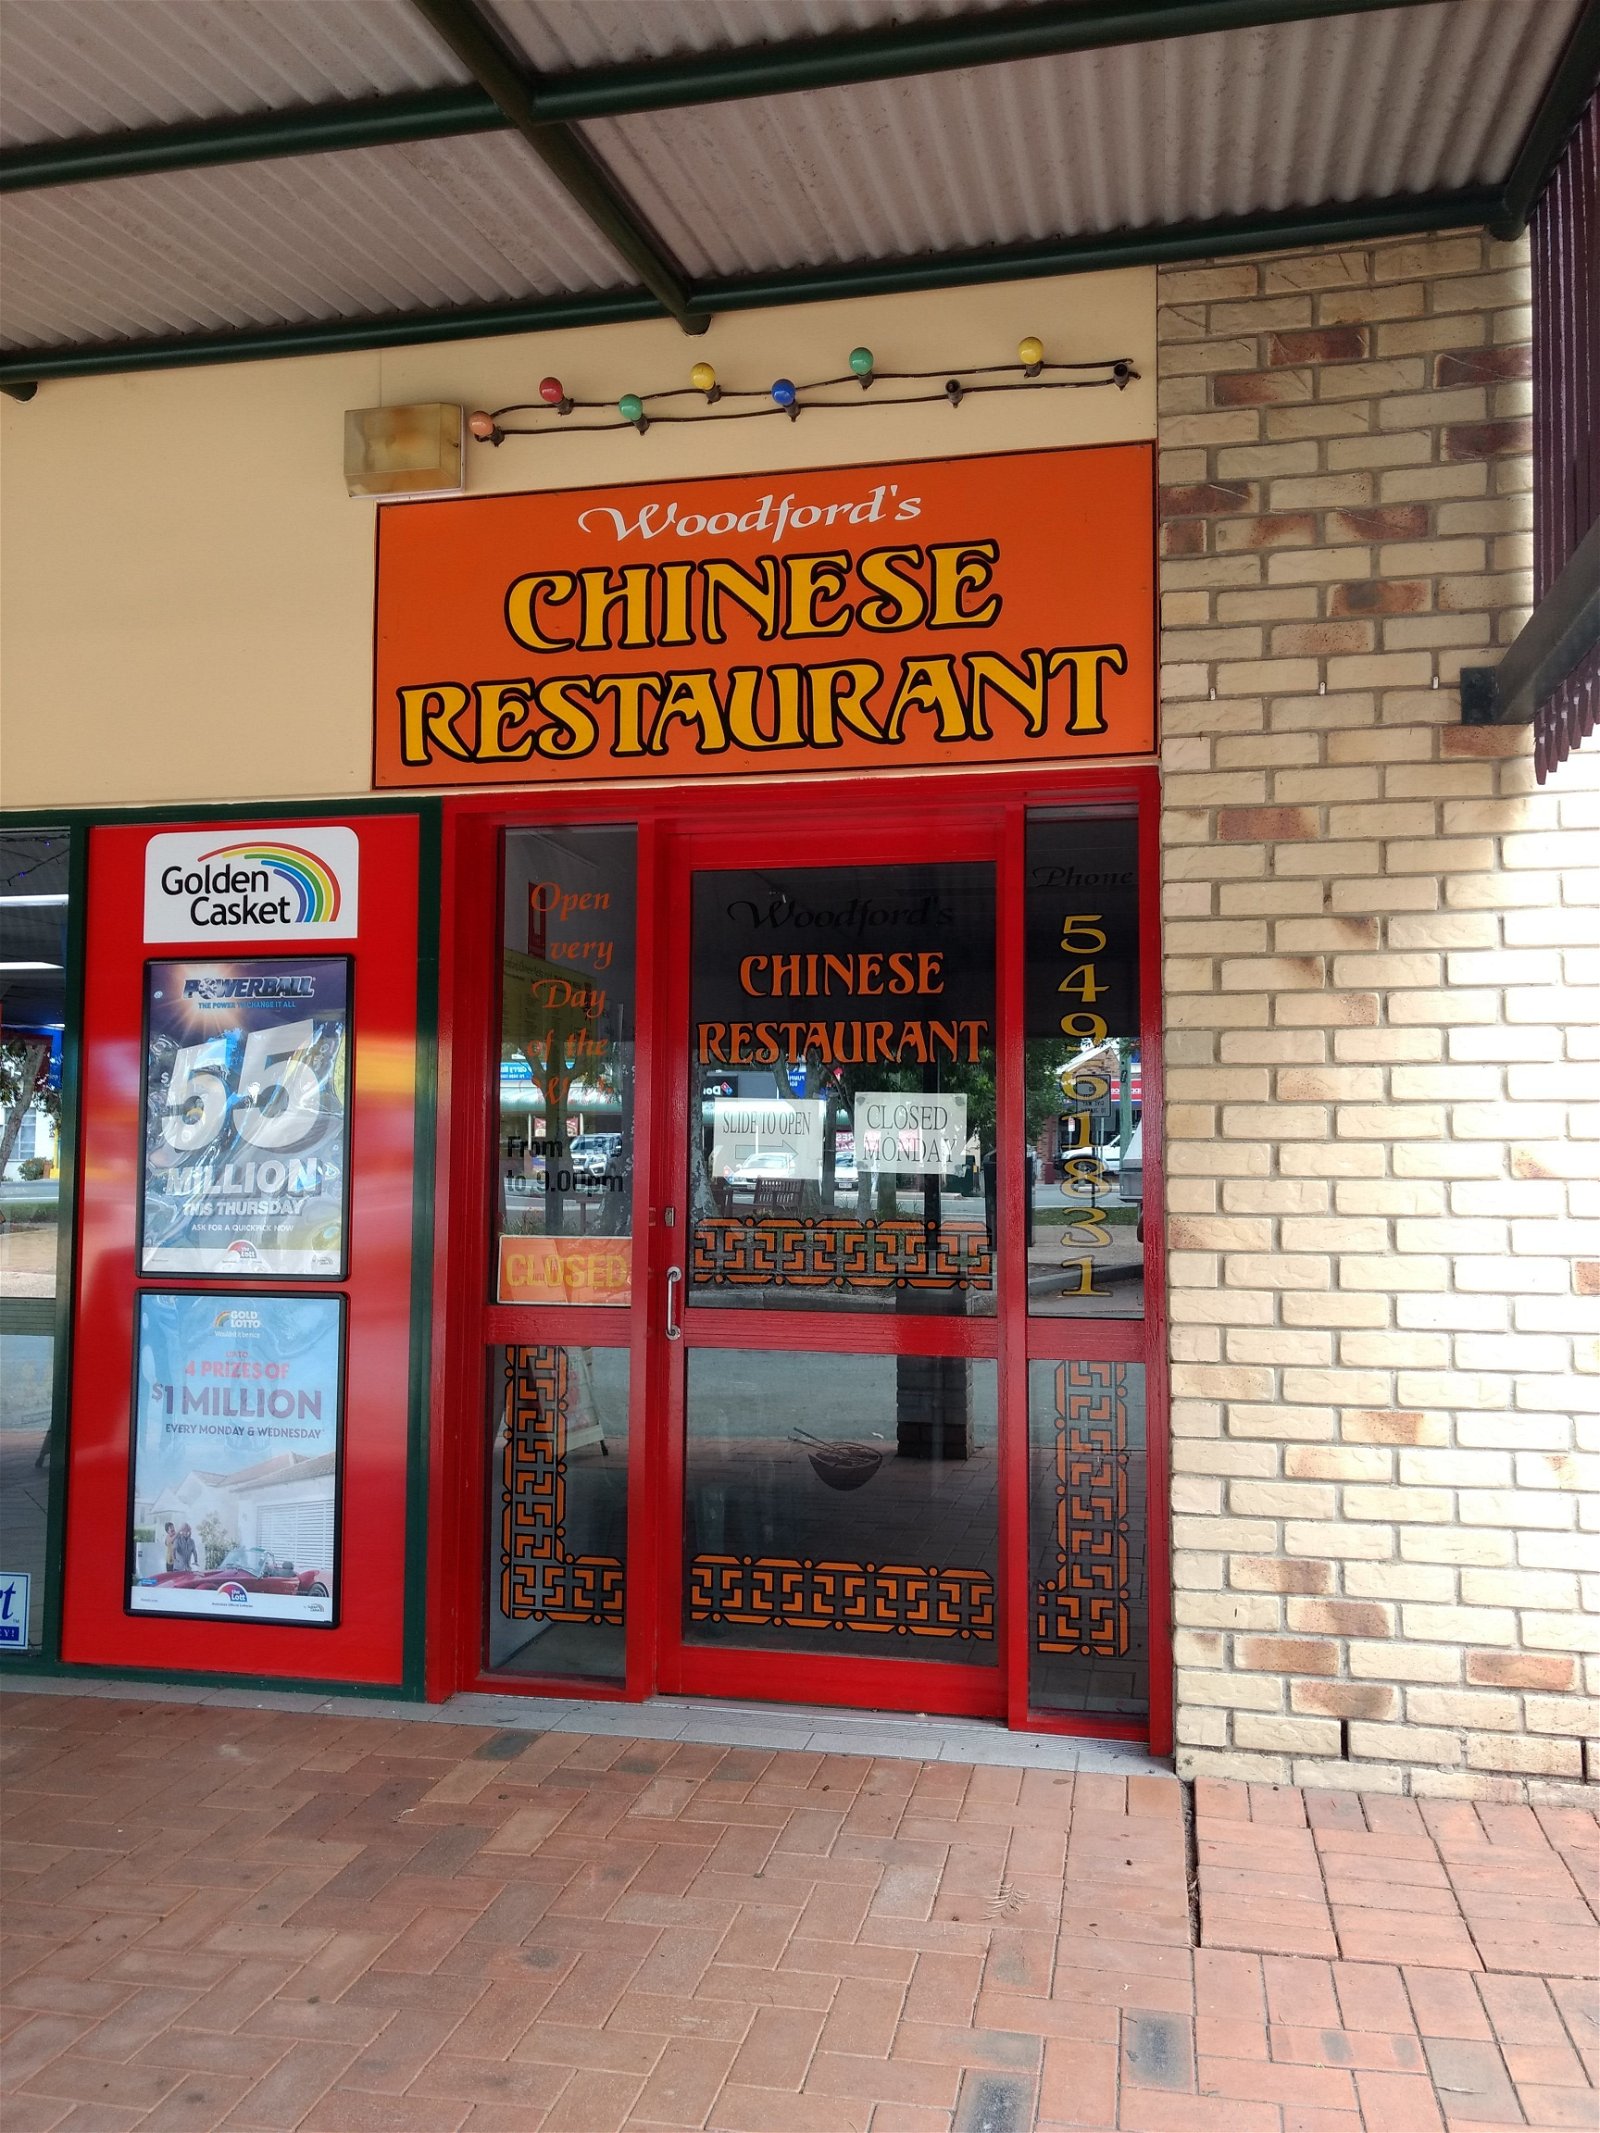 Woodford's Chinese Restaurant